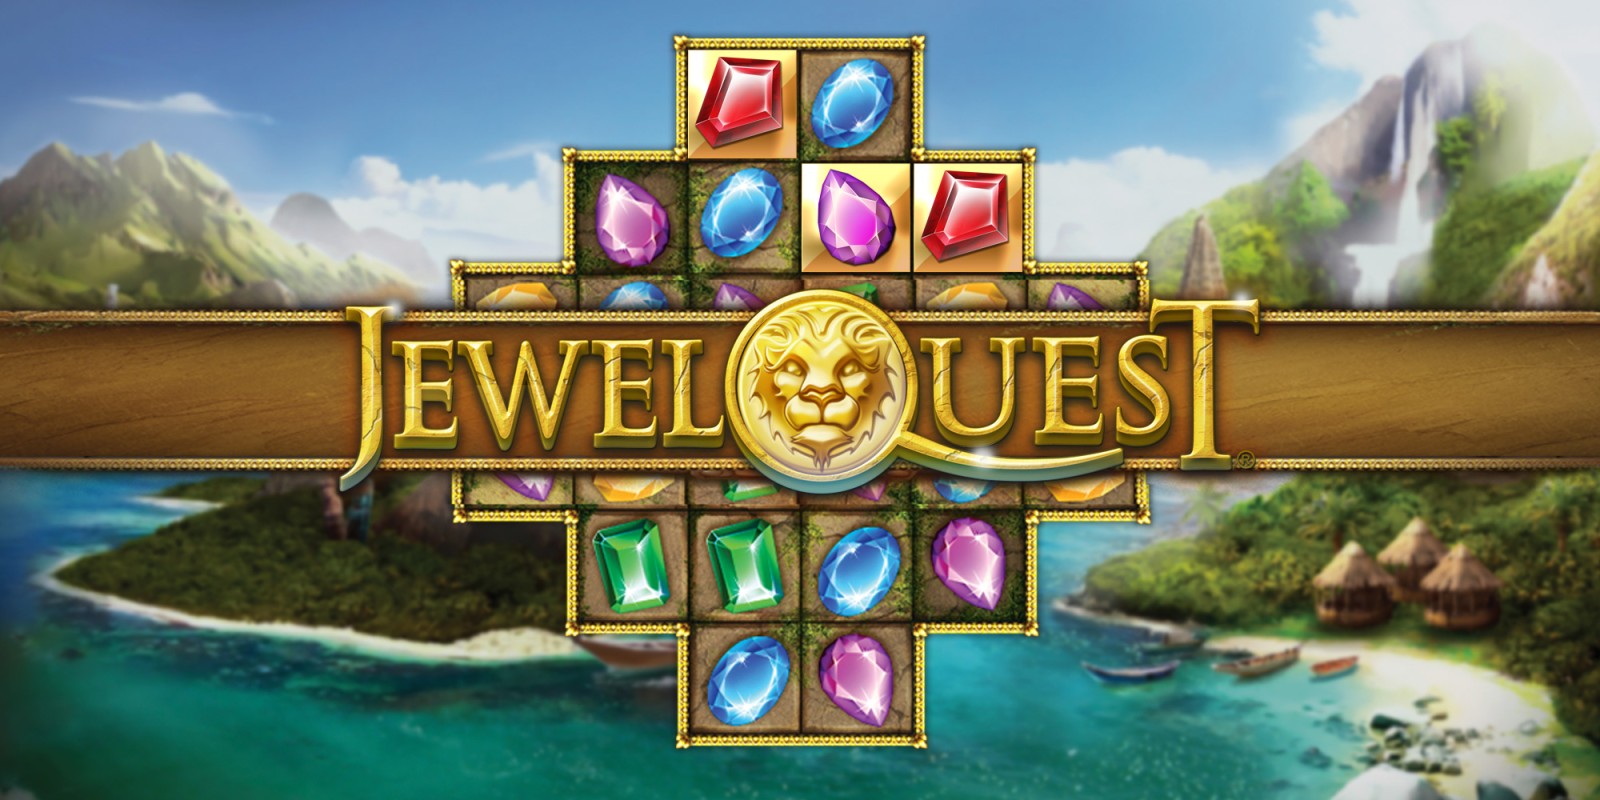 Jewel Quest • Play Jewel Quest Game for Free Online